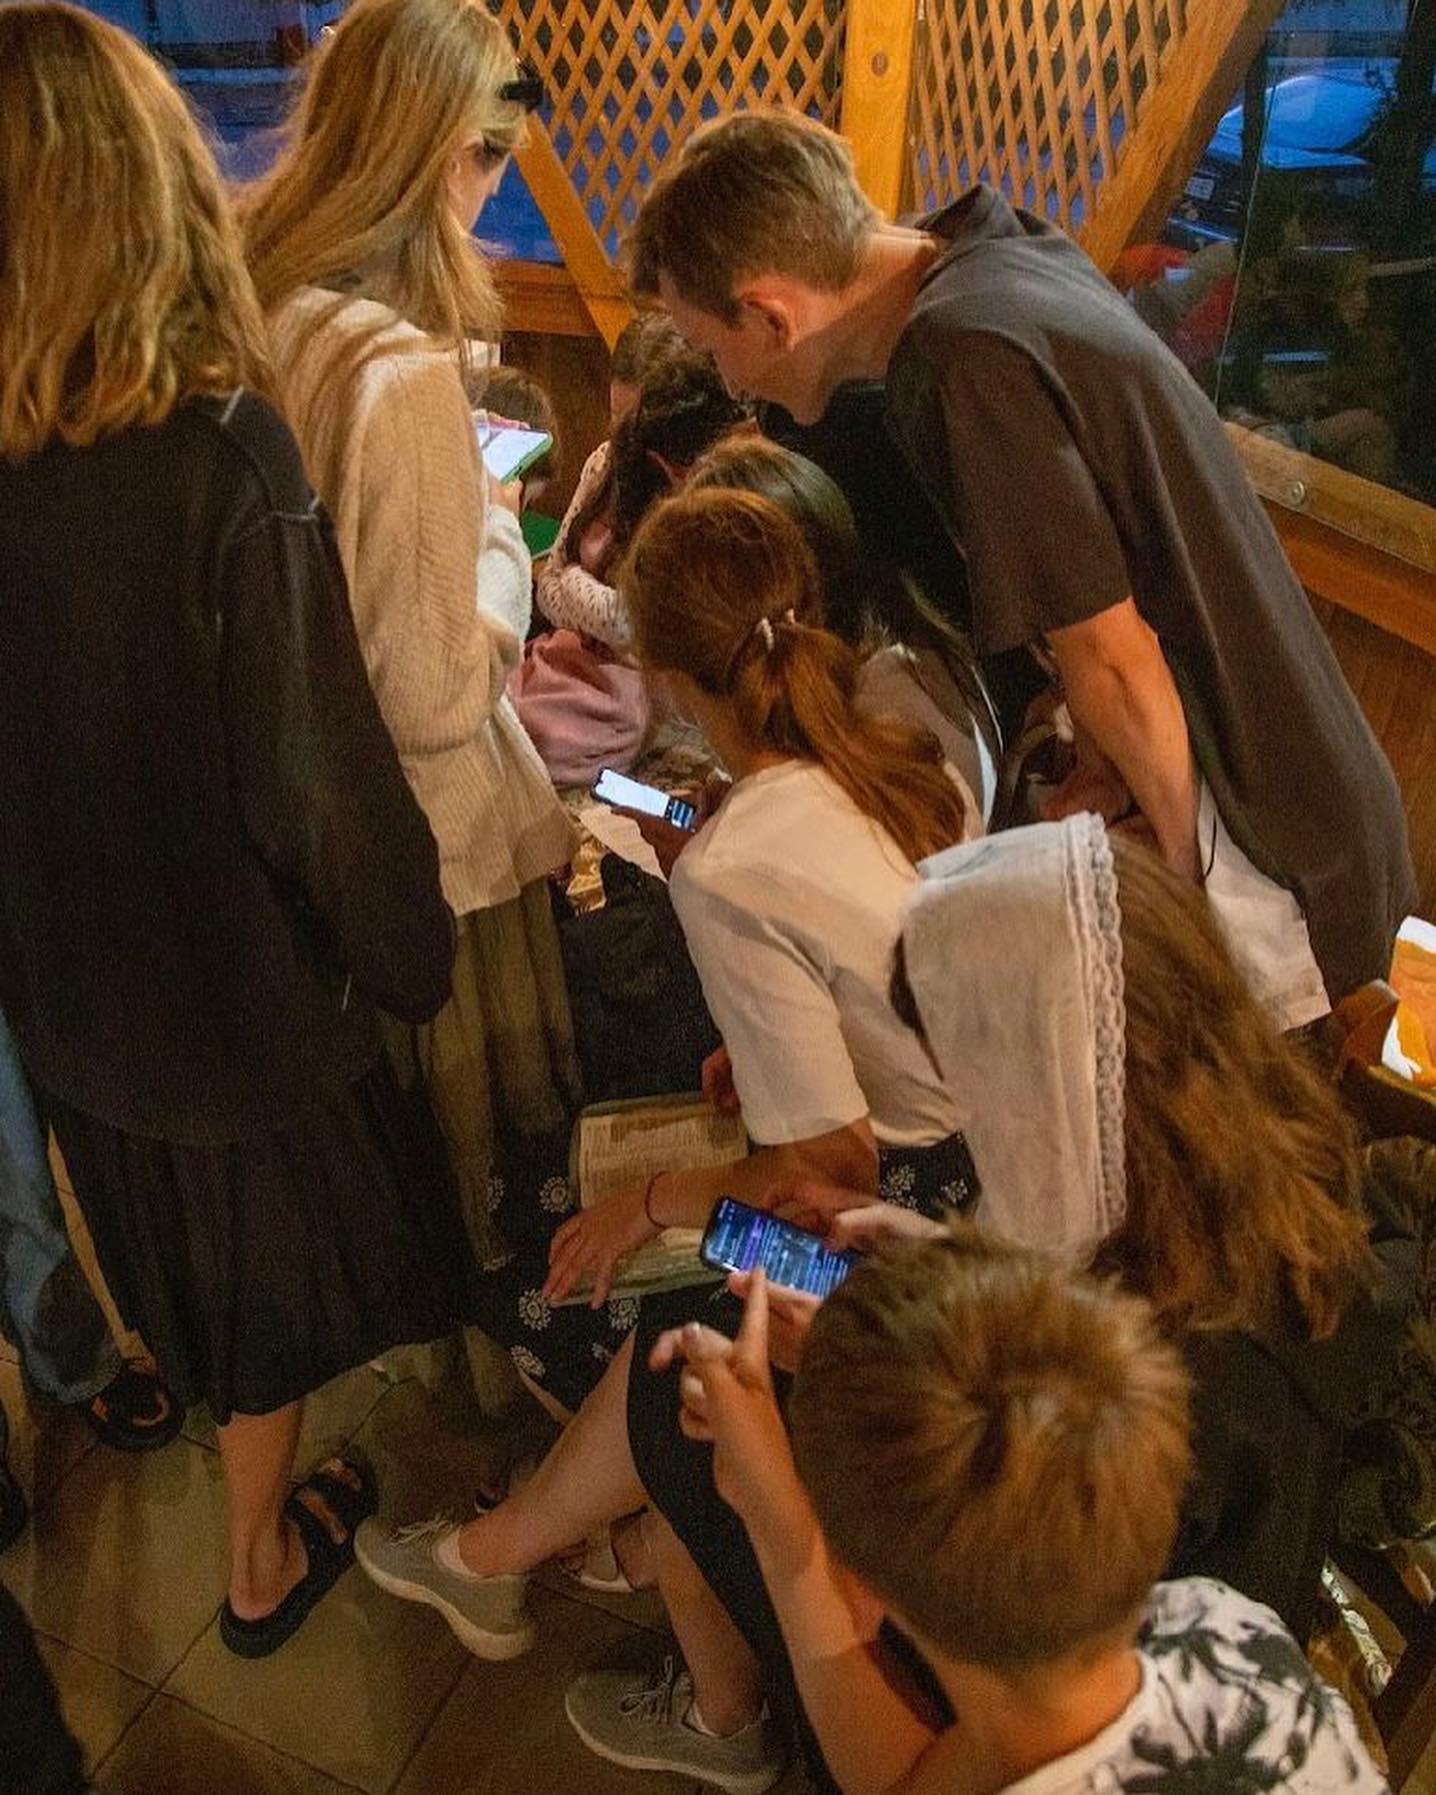 A group of people looking at their phones in a restaurant.